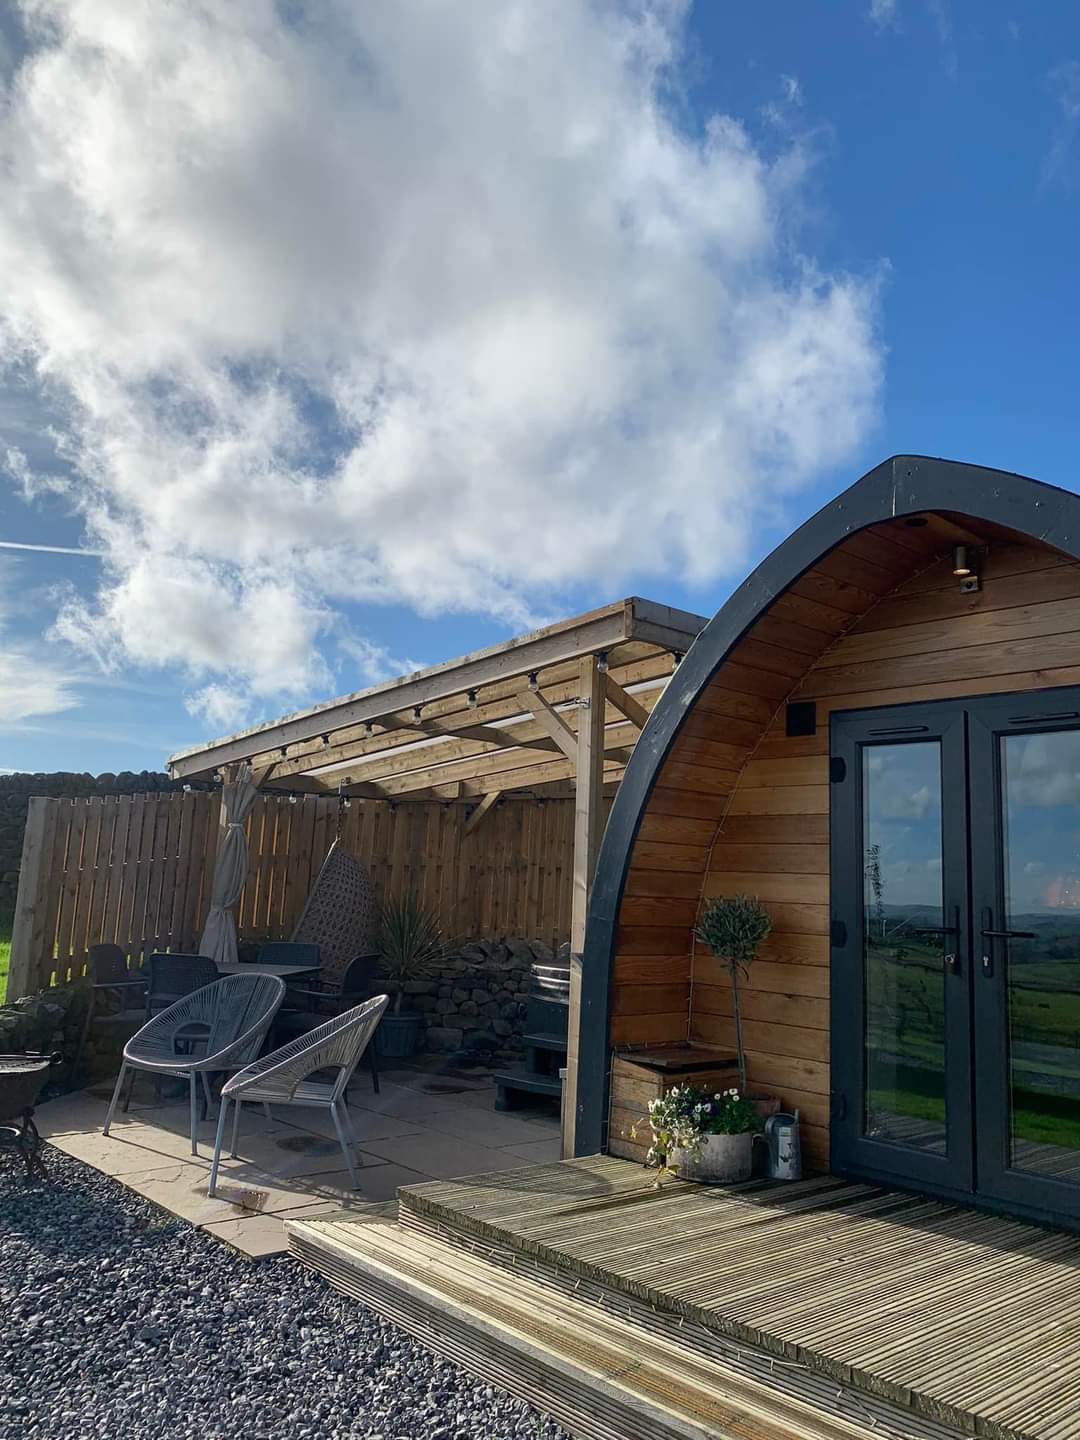 Glamping in the Yorkshire Dales 